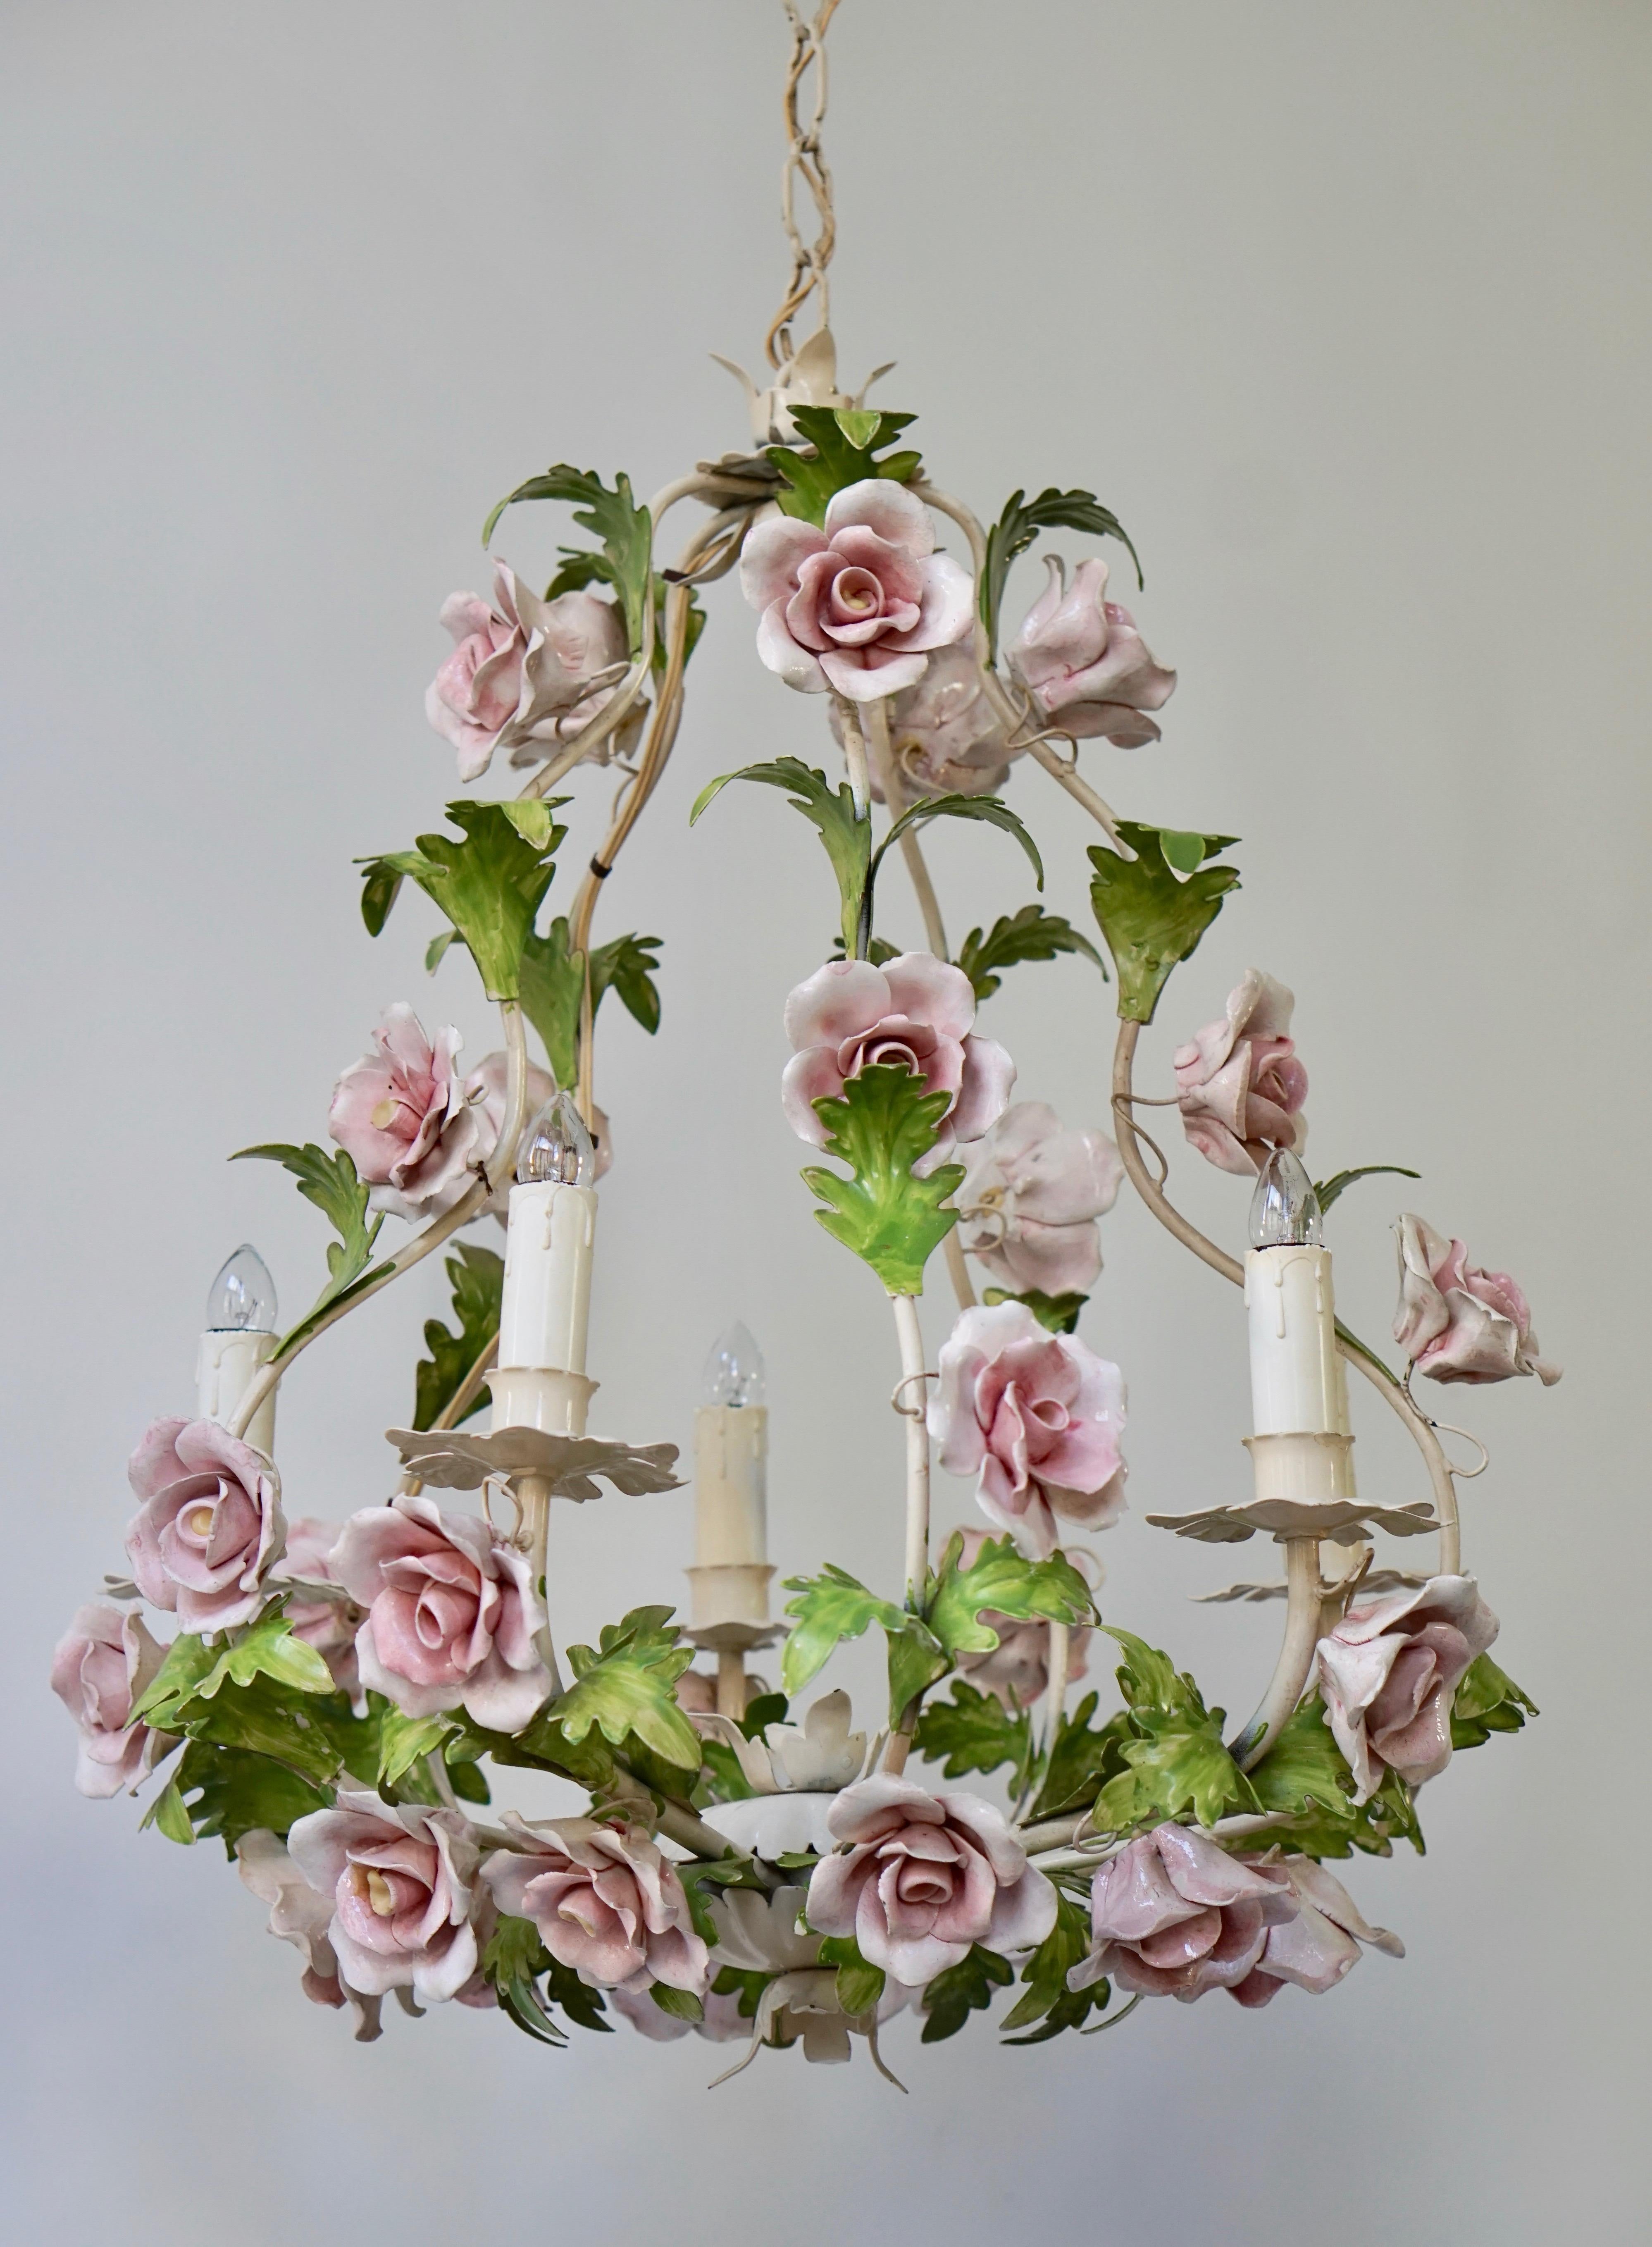 An Italian handcut tole chandelier. The cage form metal frame ornamented with tole leaves, and pink-white porcelain flowers.
Measures: Diameter 50 cm.
Height fixture 58 cm.
Total height 110 cm.
Five E14 bulbs.